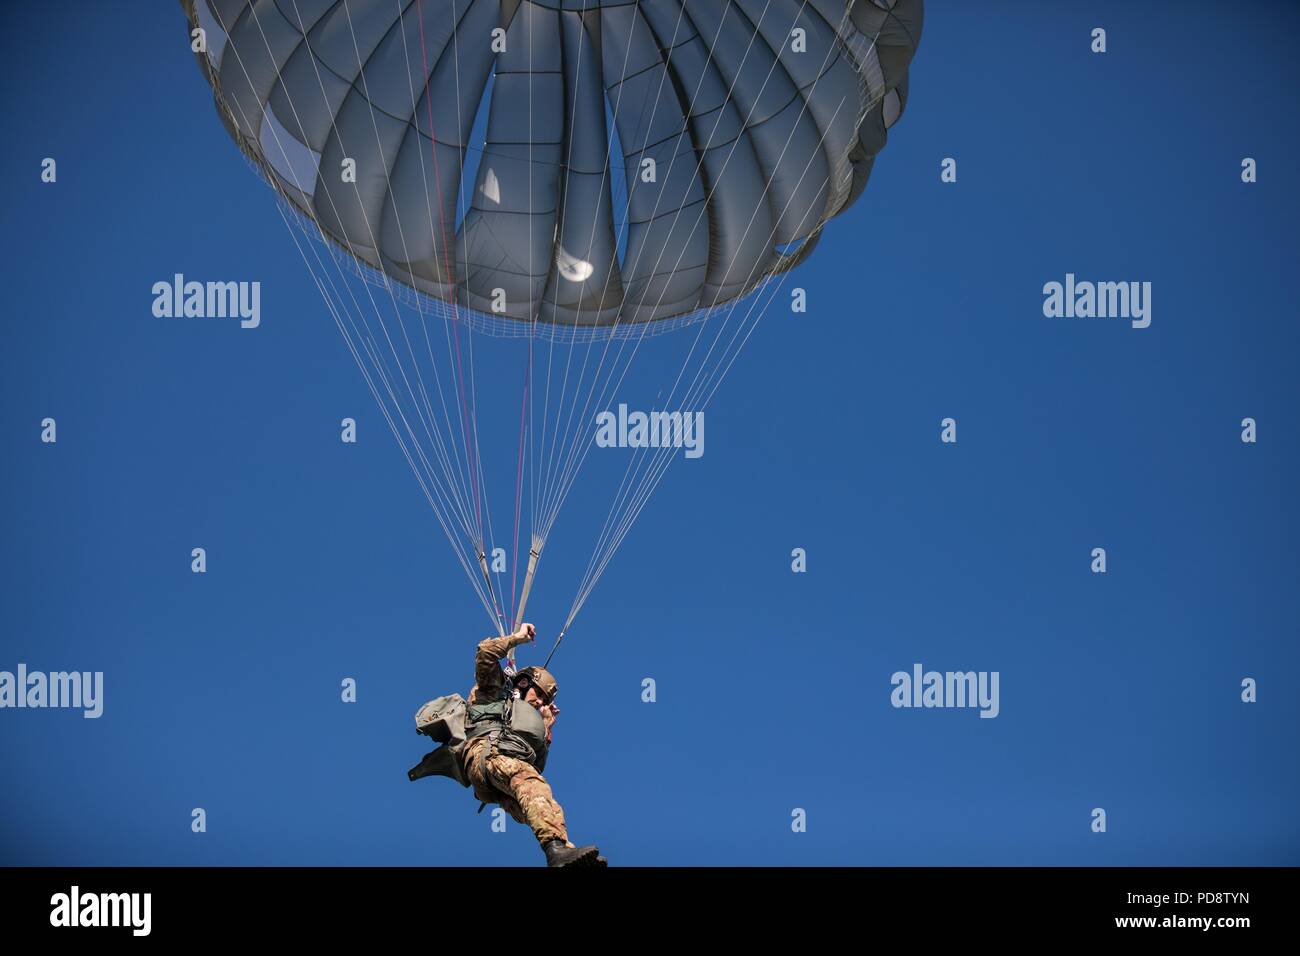 An Italian paratrooper descends onto Castle Drop Zone during Leapfest at the University of Rhode Island, West Kingston, R.I. Aug. 5, 2018, August 5, 2018. Leapfest is the largest, longest standing, international static line parachute training event and competition hosted by the 56th Troop Command, Rhode Island Army National Guard to promote high level technical and esprit de corps within the International Airborne community. (U.S. Army photo by Sgt. Josephine Carlson). () Stock Photo